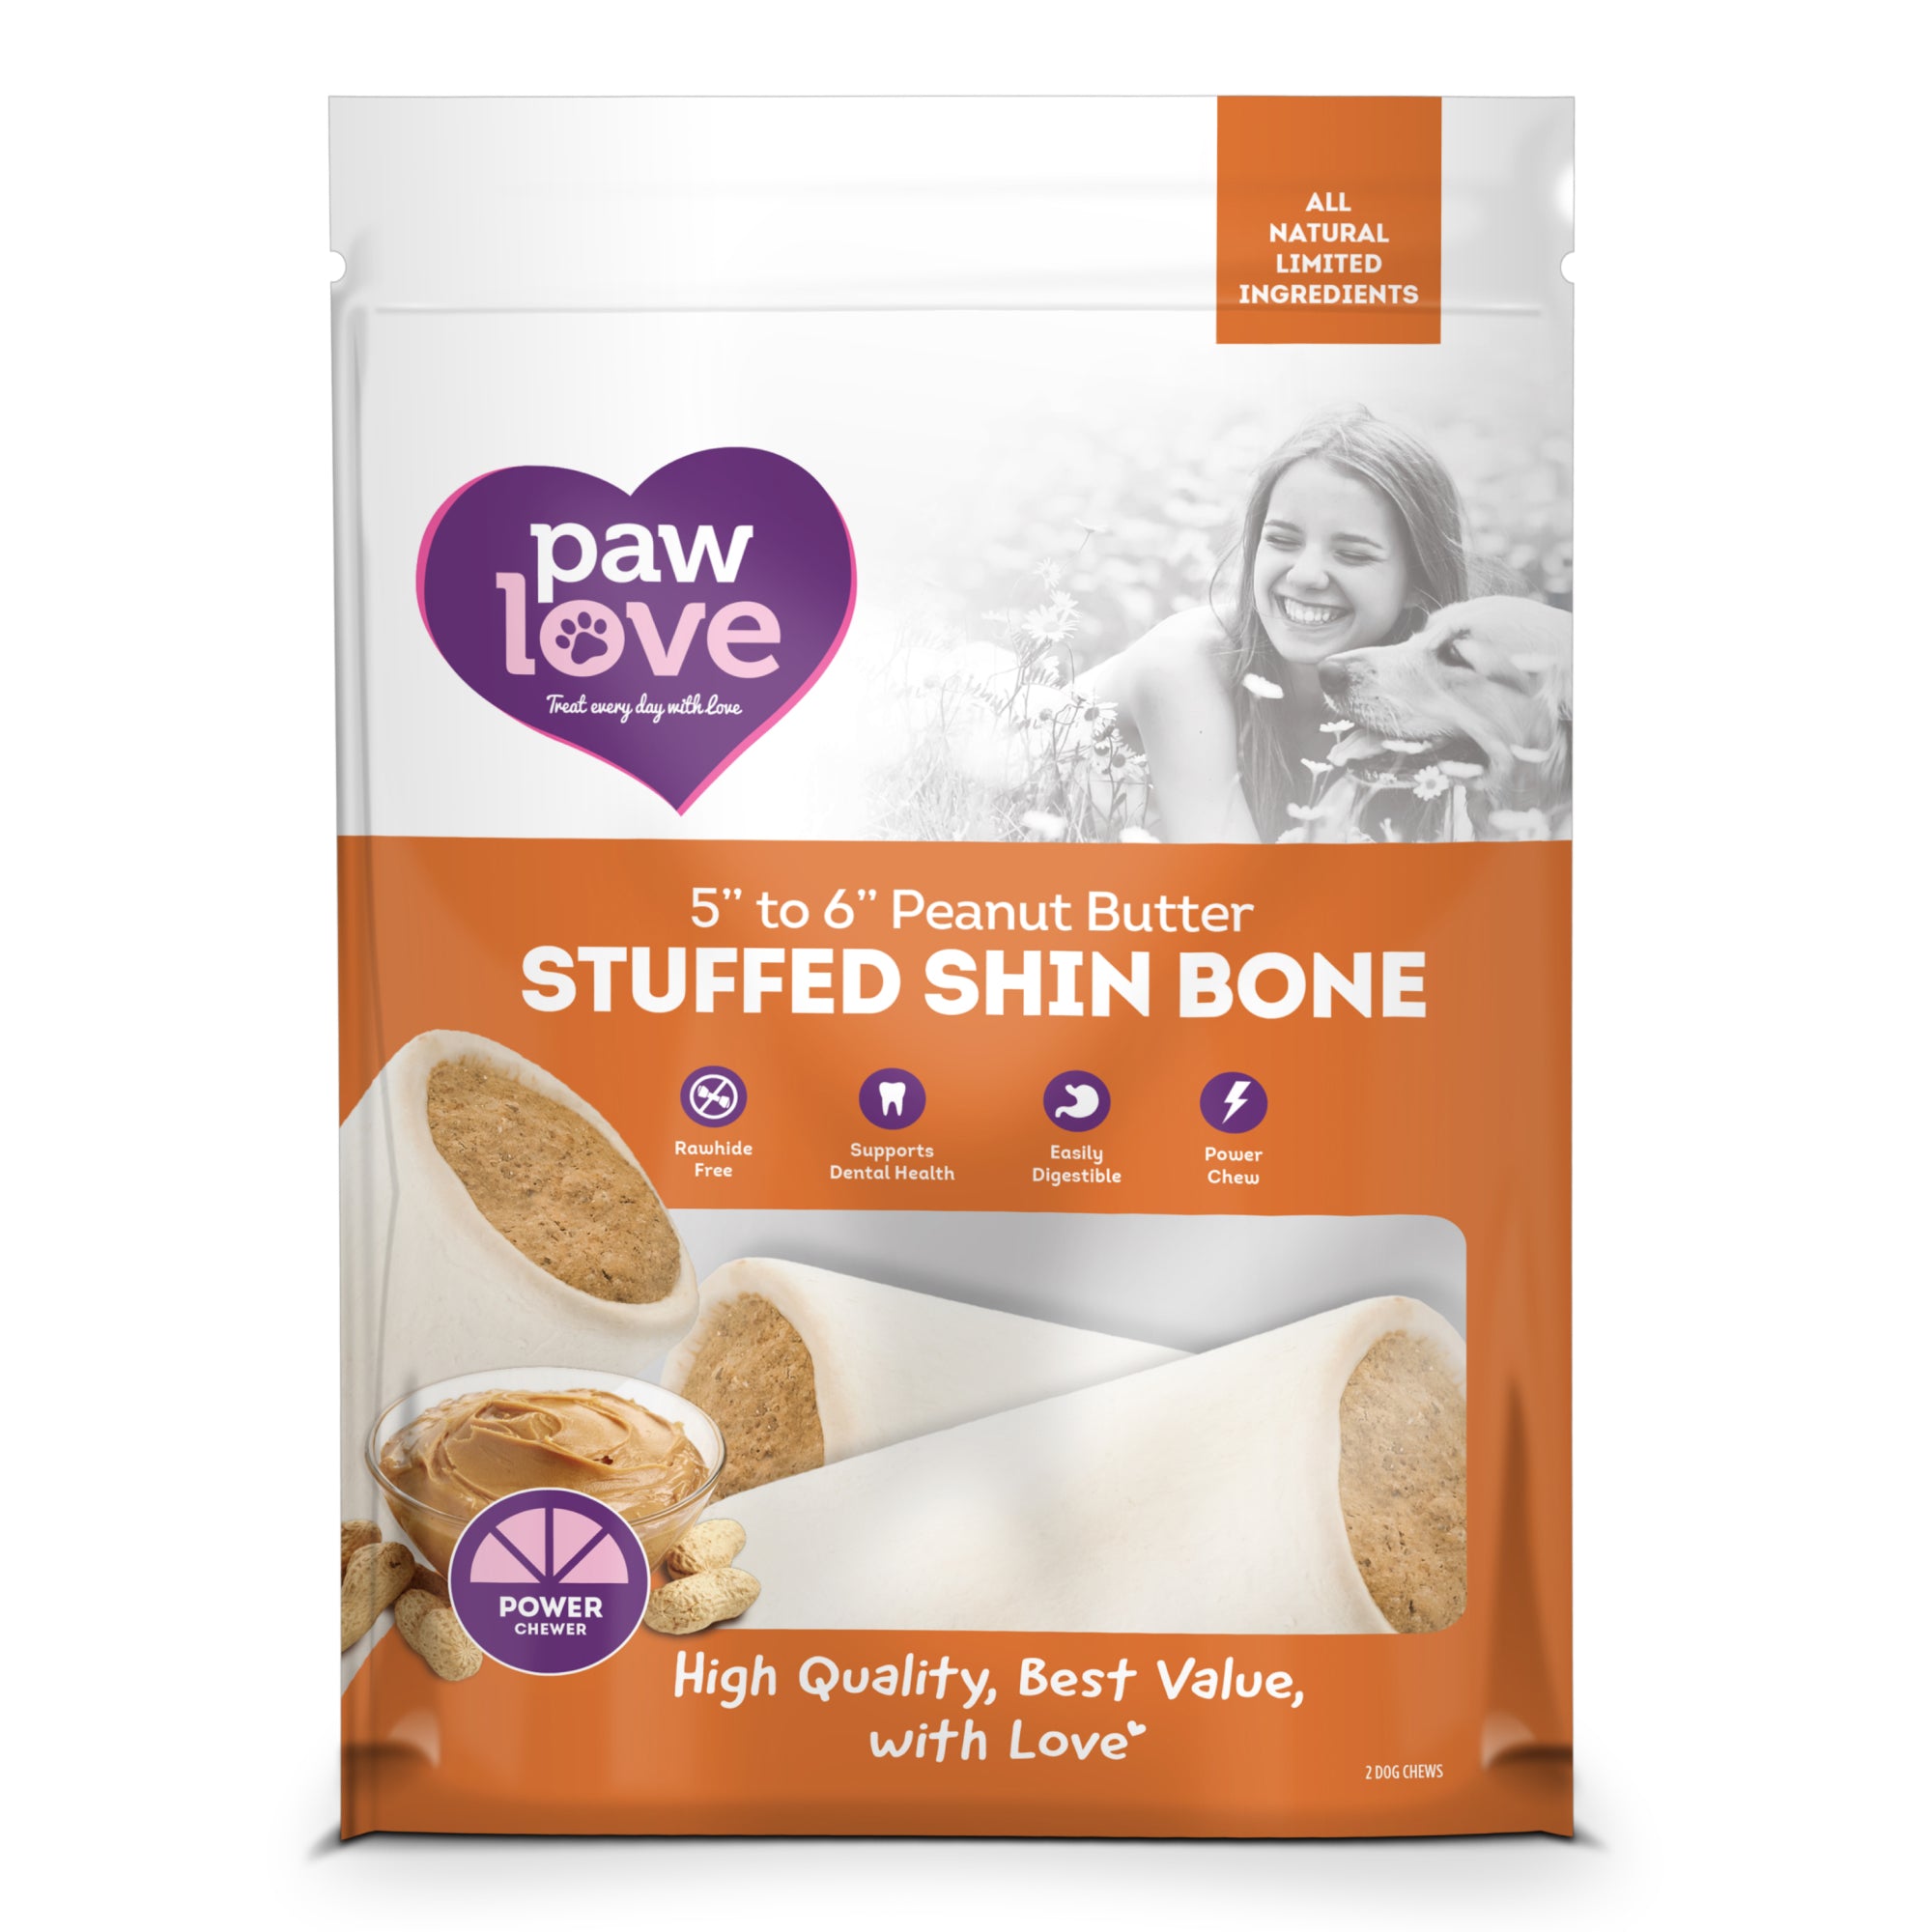 Paw Love's PW 5-6" Peanut Butter Stuffed Shin (Walmart) is a long-lasting chew toy filled with peanut butter.